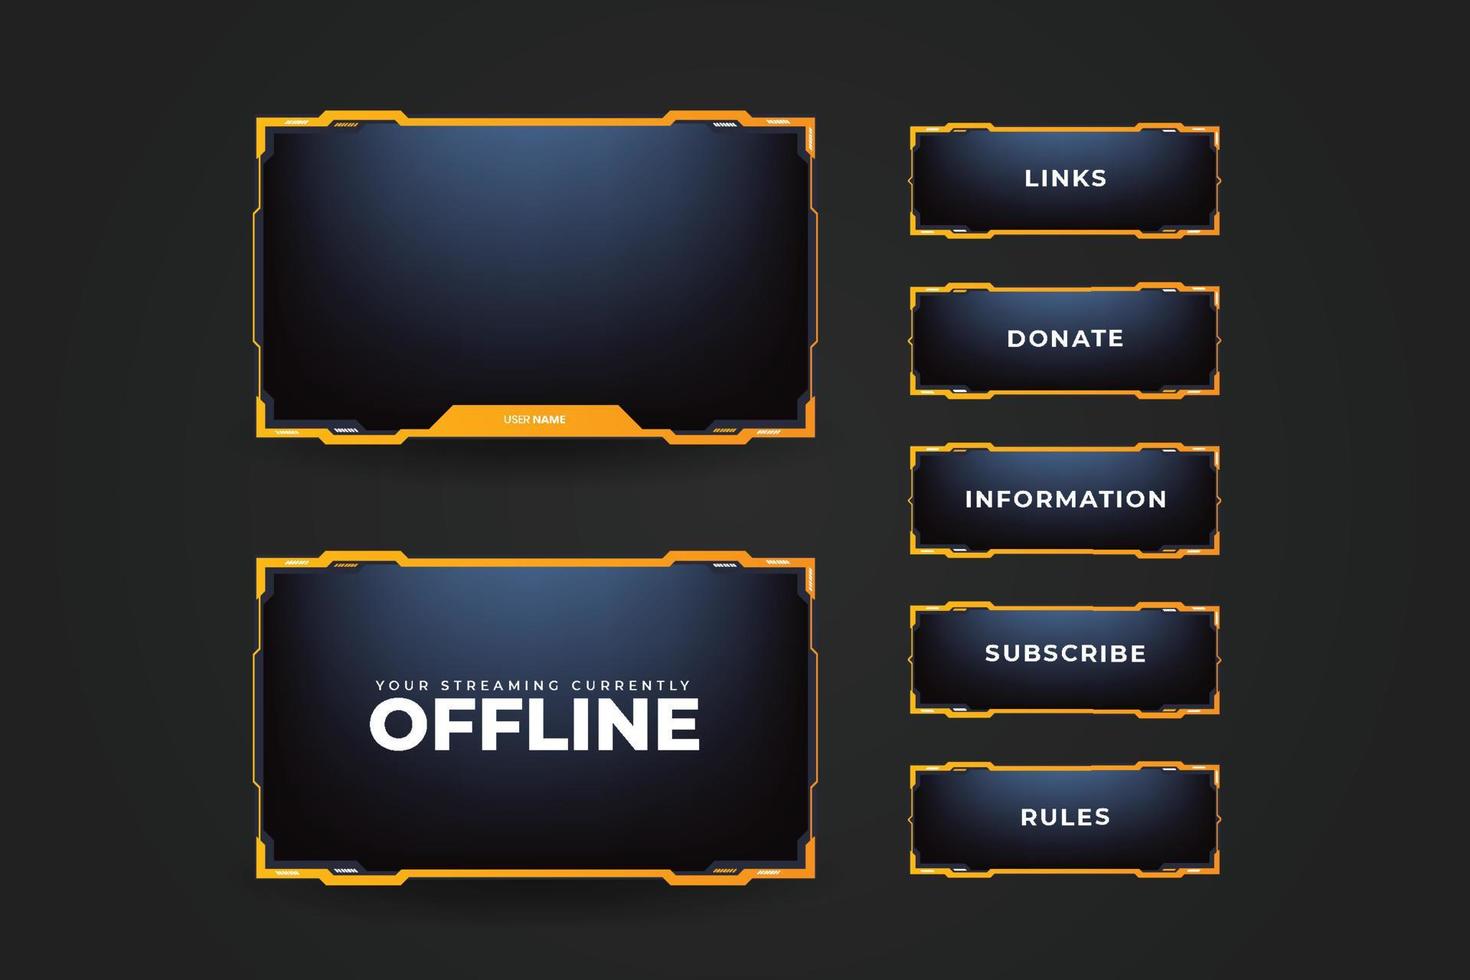 Simple overlay decoration with yellow color borders and buttons. Online gamer screen interface design on a dark background. Offline and online screen collection for live streamers. vector